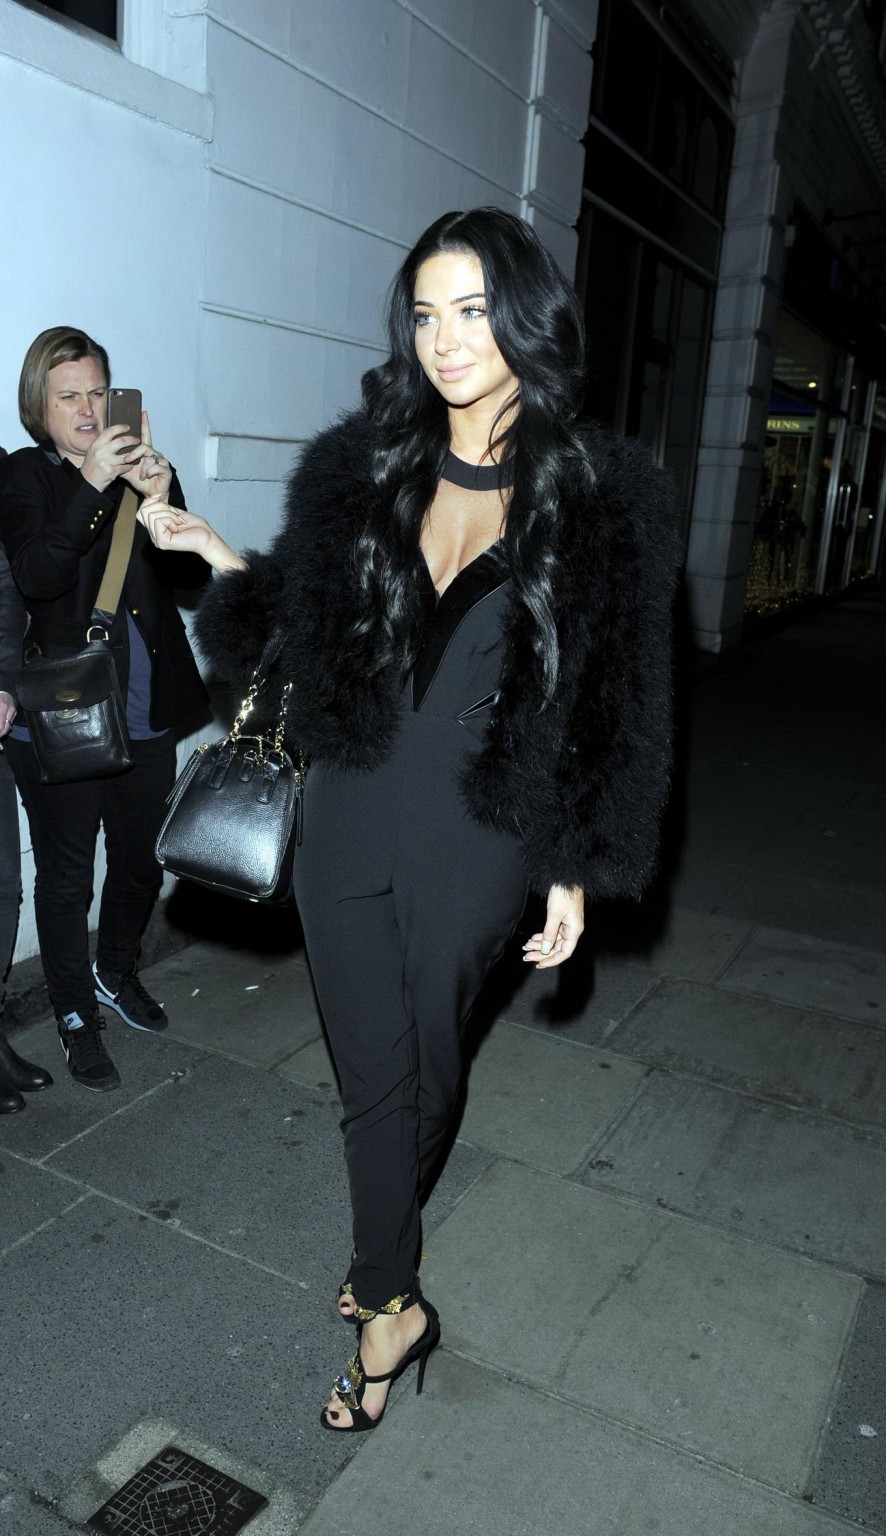 Tulisa Contostavlos showing cleavage outside the Ramusake club in London #75177522